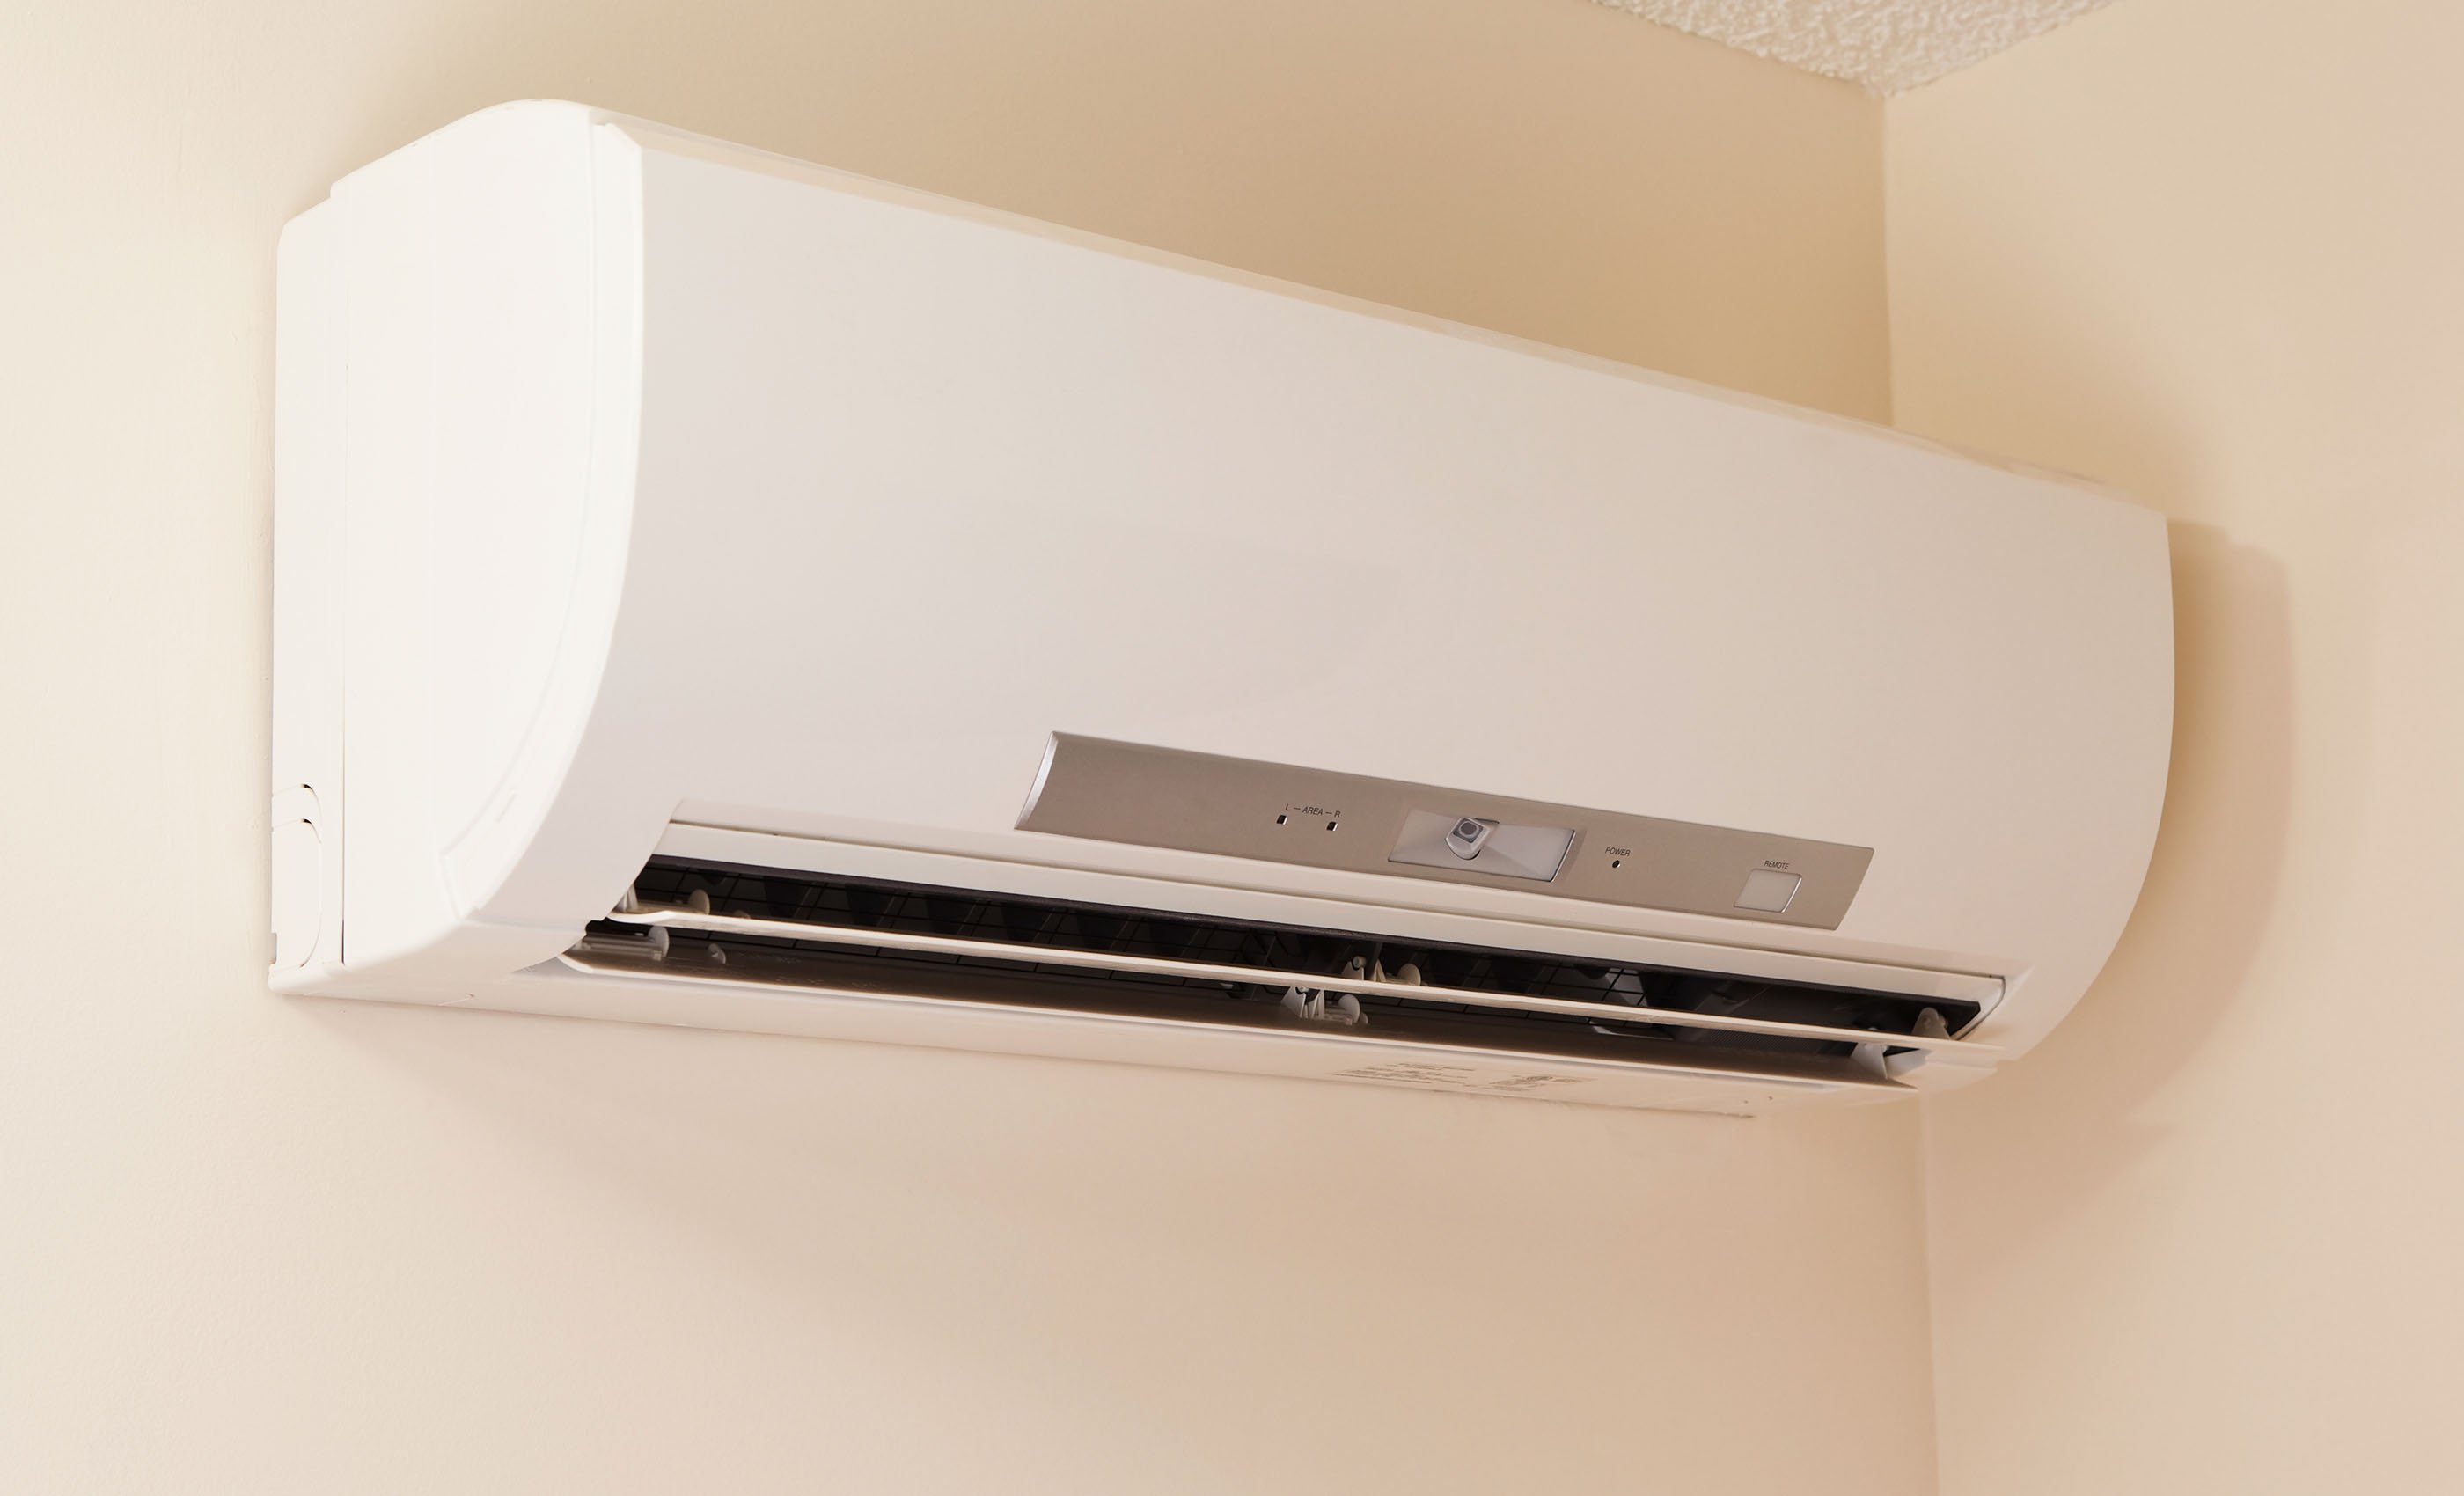 A Mini Split Ductless Air Conditioning System.